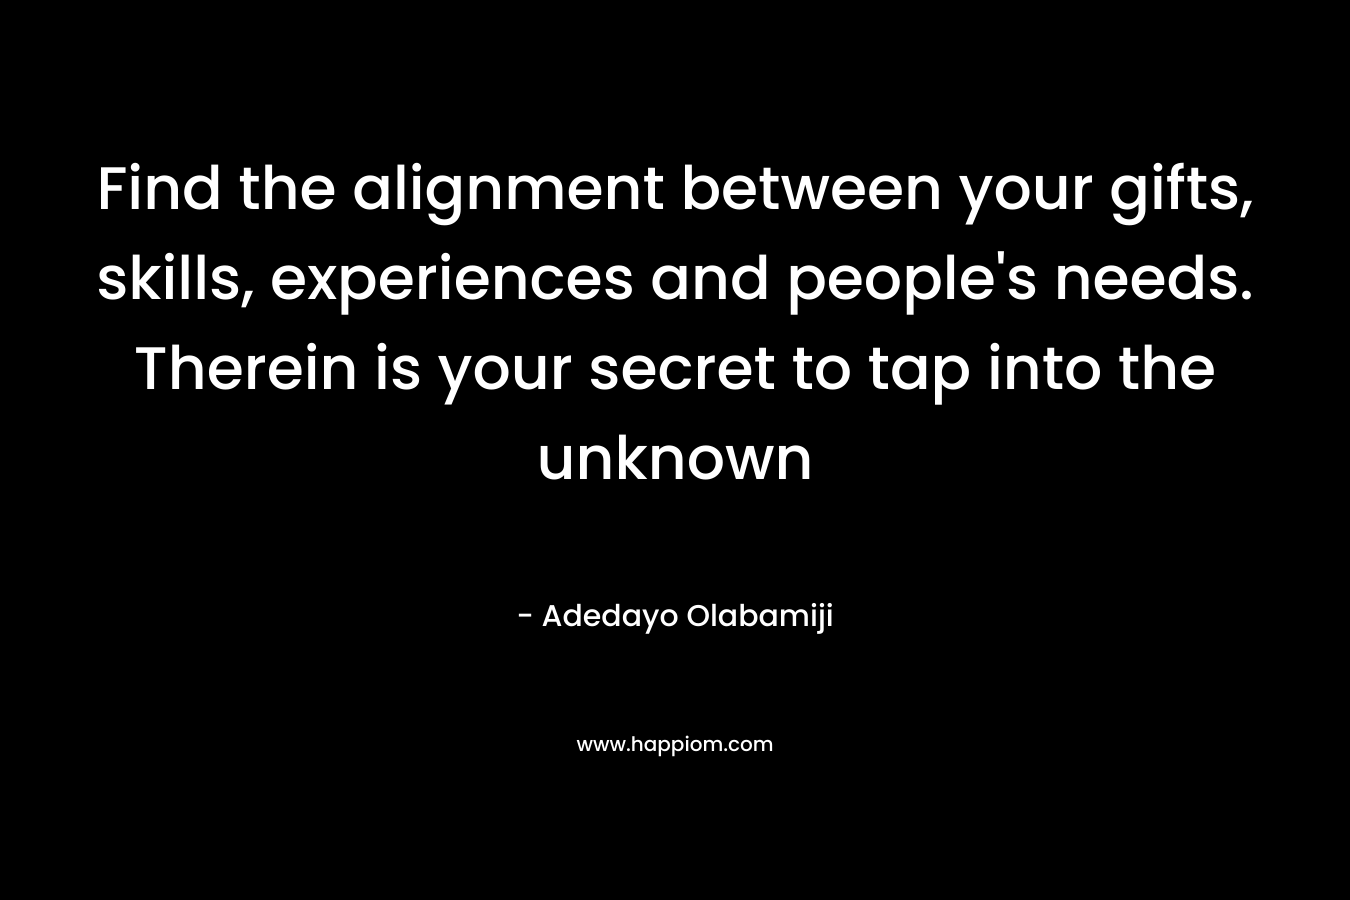 Find the alignment between your gifts, skills, experiences and people's needs. Therein is your secret to tap into the unknown